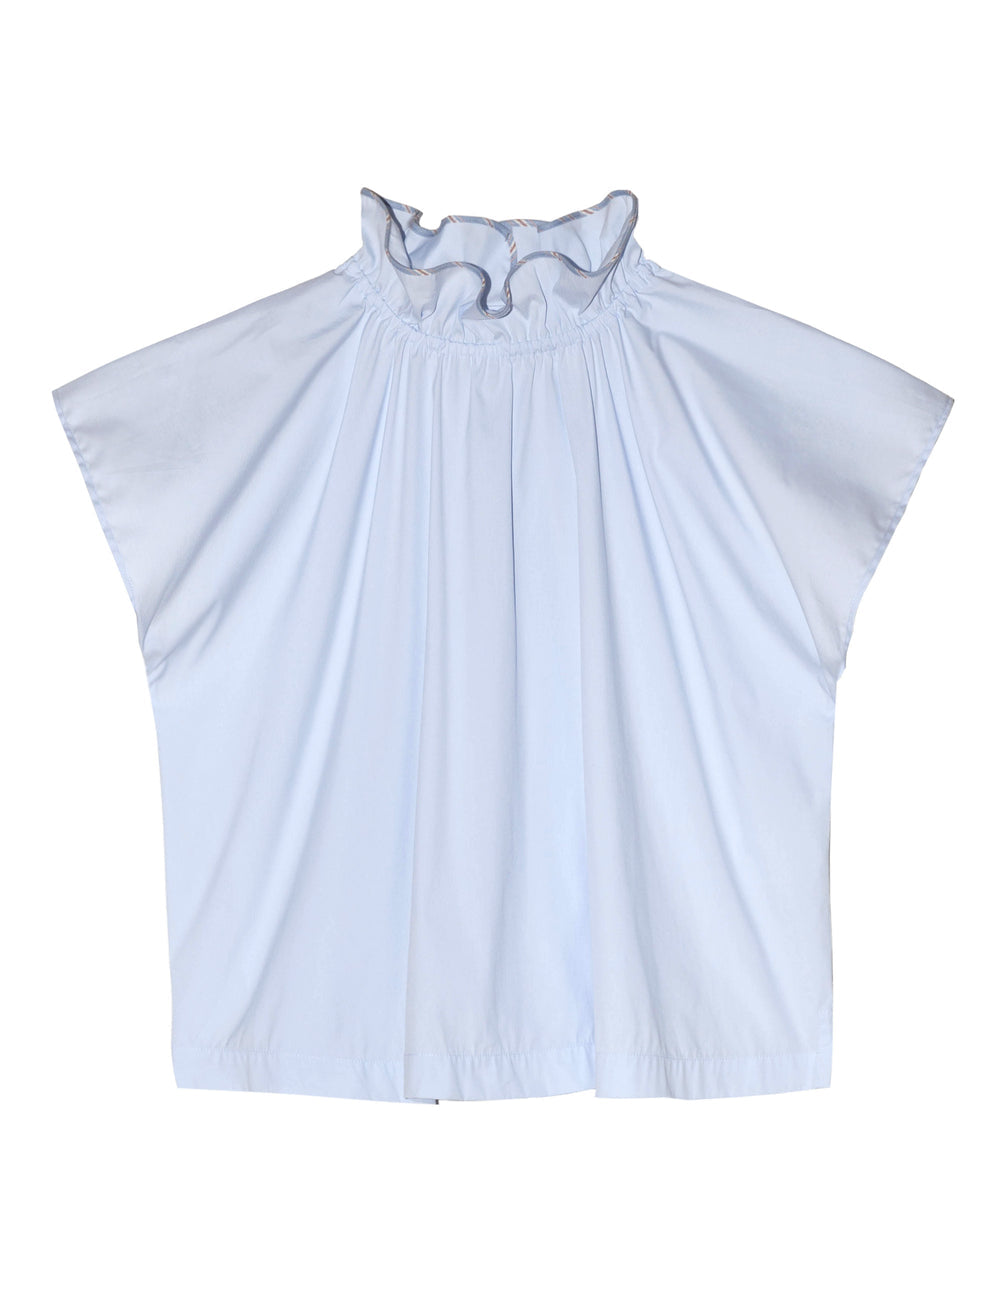 APOF Ada Top in Light Blue Cotton with Striped Piping